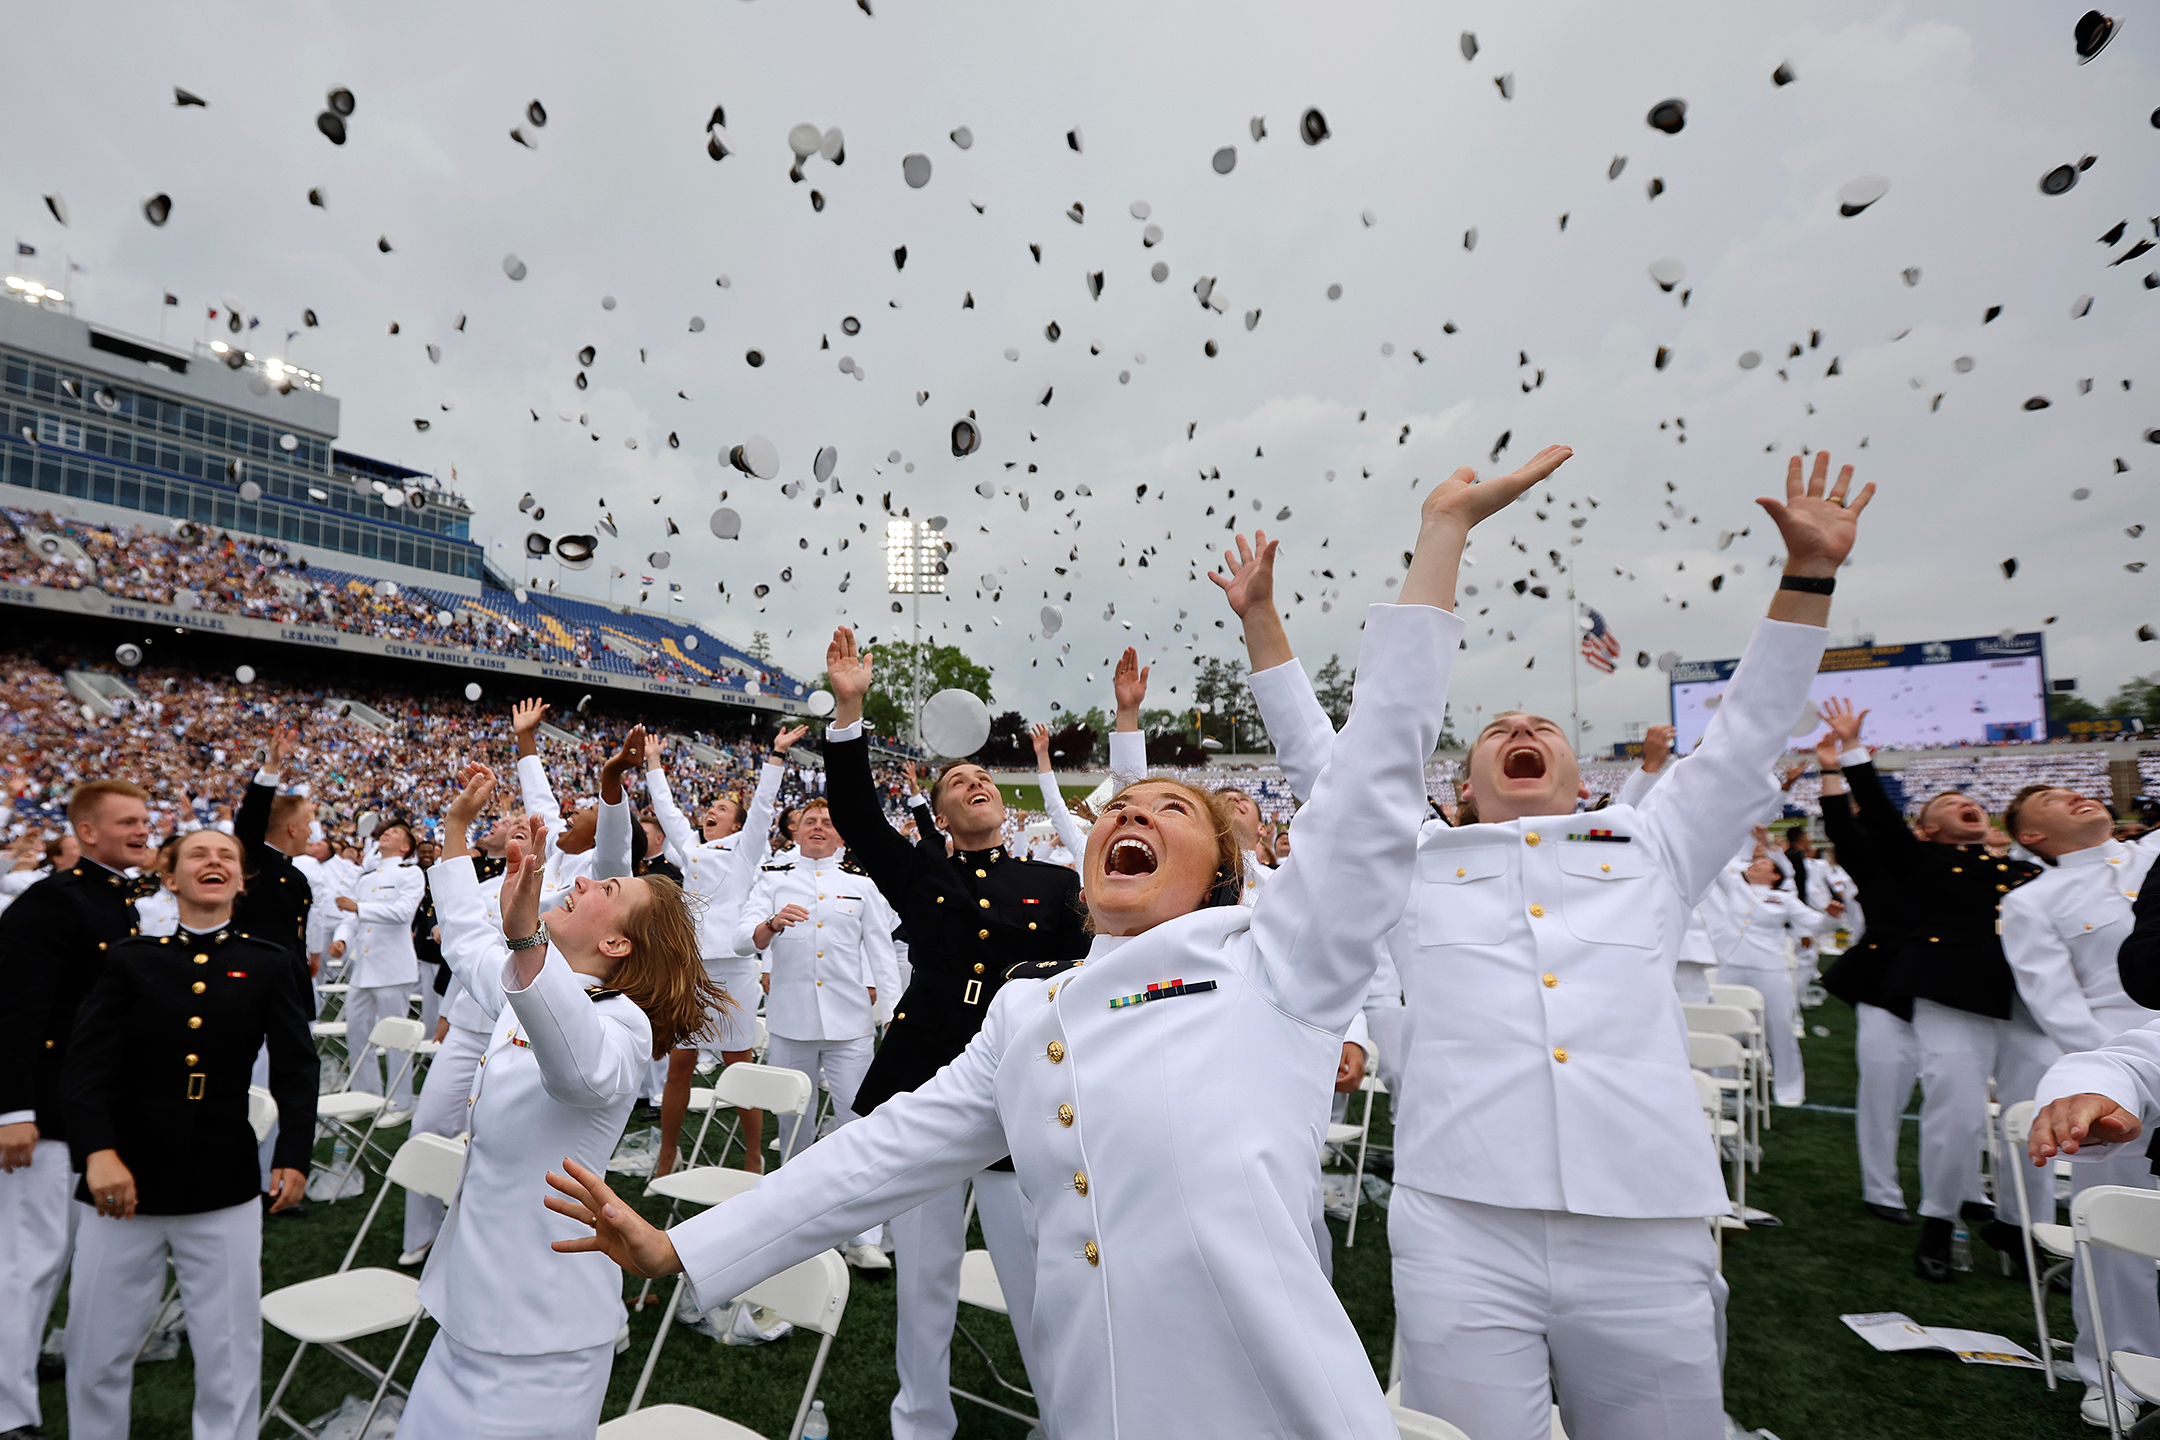 Naval Academy graduates smiling and throwing their caps in the air